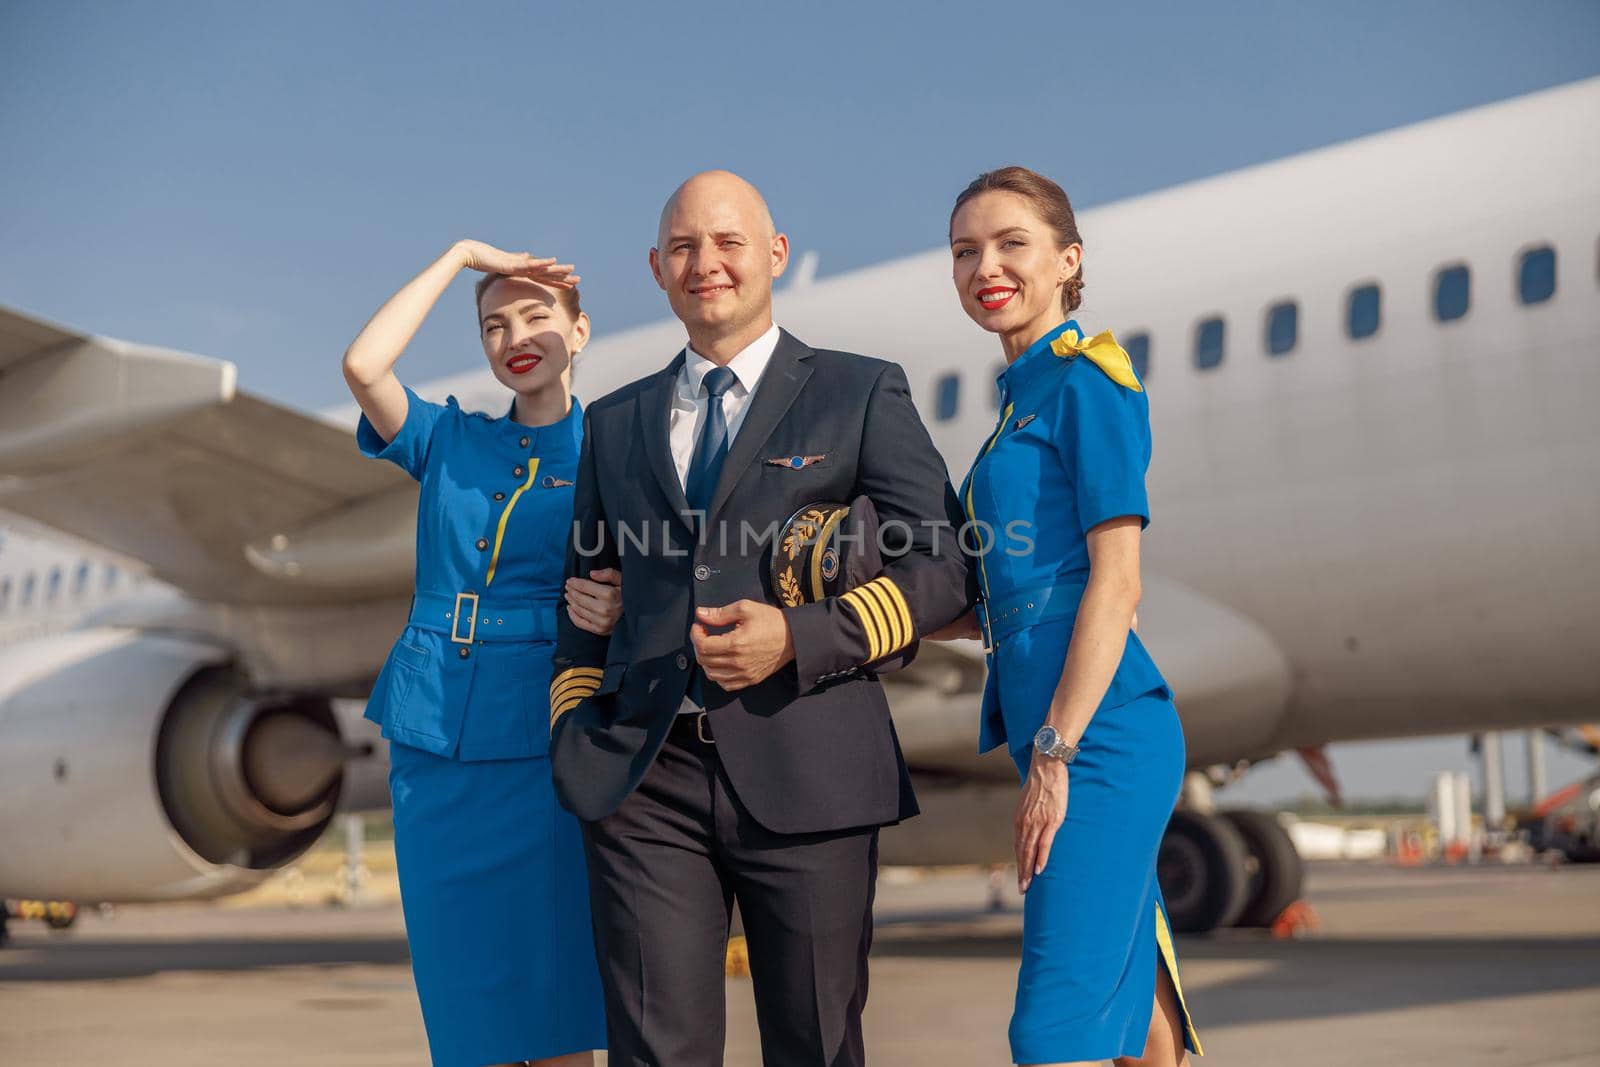 Happy pilot and two attractive stewardesses standing together in front of an airplane and smiling after landing. Aircraft, aircrew, occupation concept